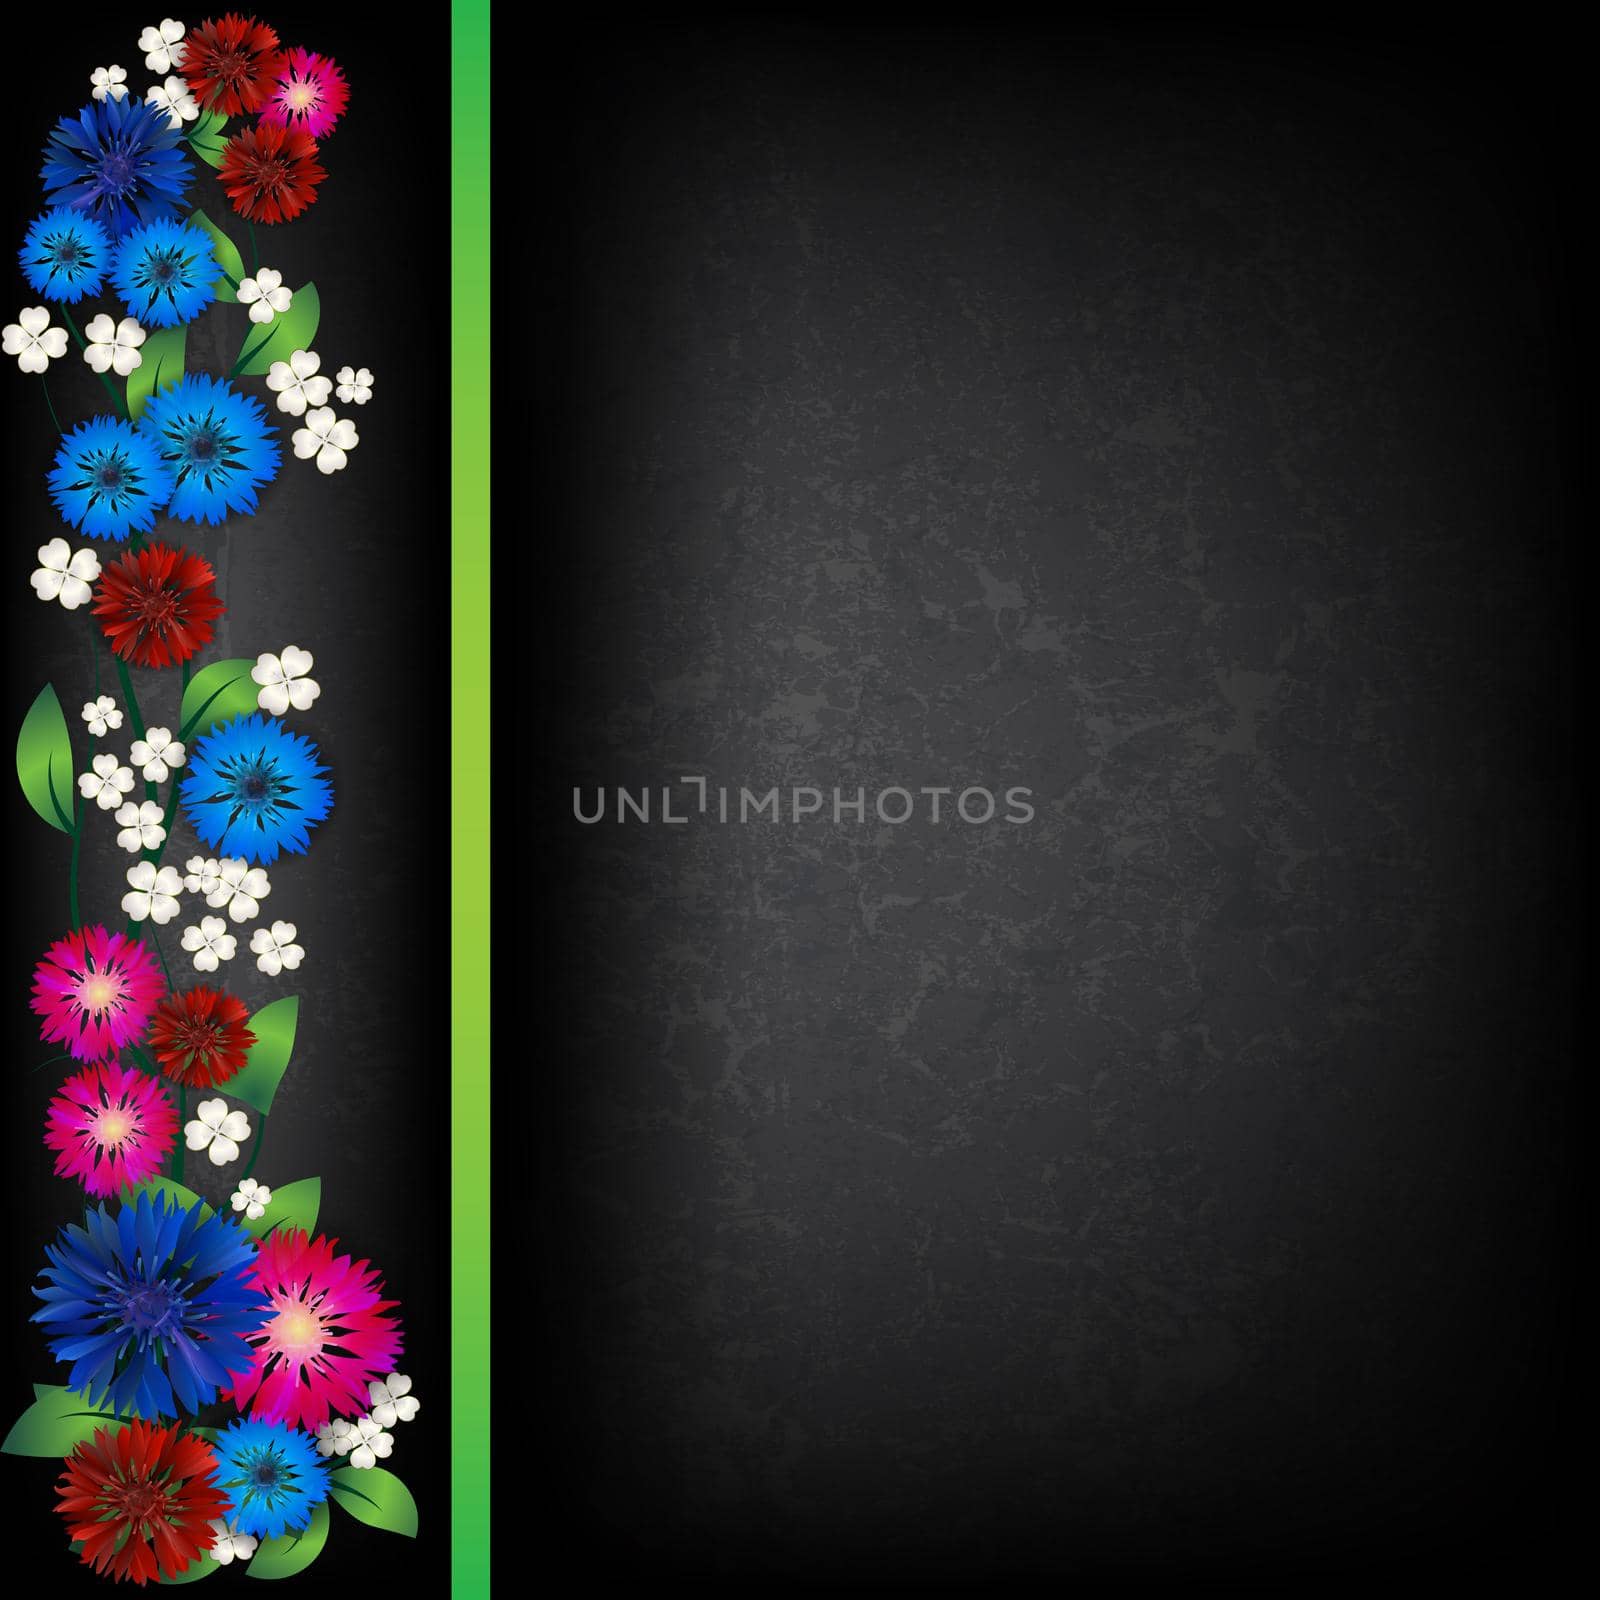 abstract floral ornament with cornflowers on grunge black background